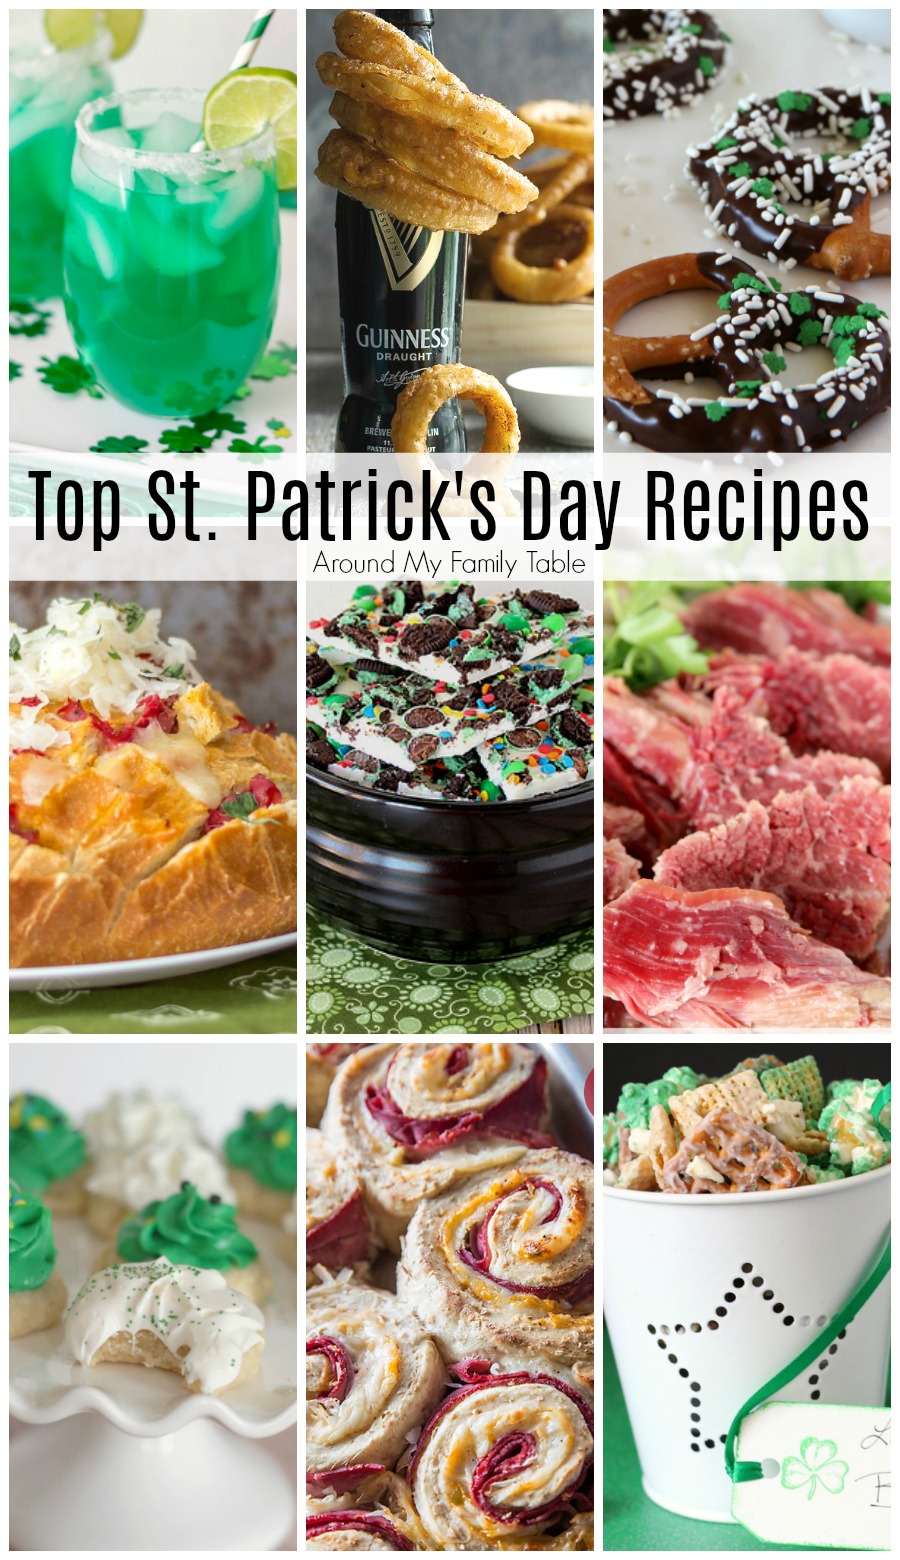 St. Patrick's Day is one of my favorite holidays.  I just love the food, so I've rounded up some of the Top St Patrick's Day Recipes. via @slingmama